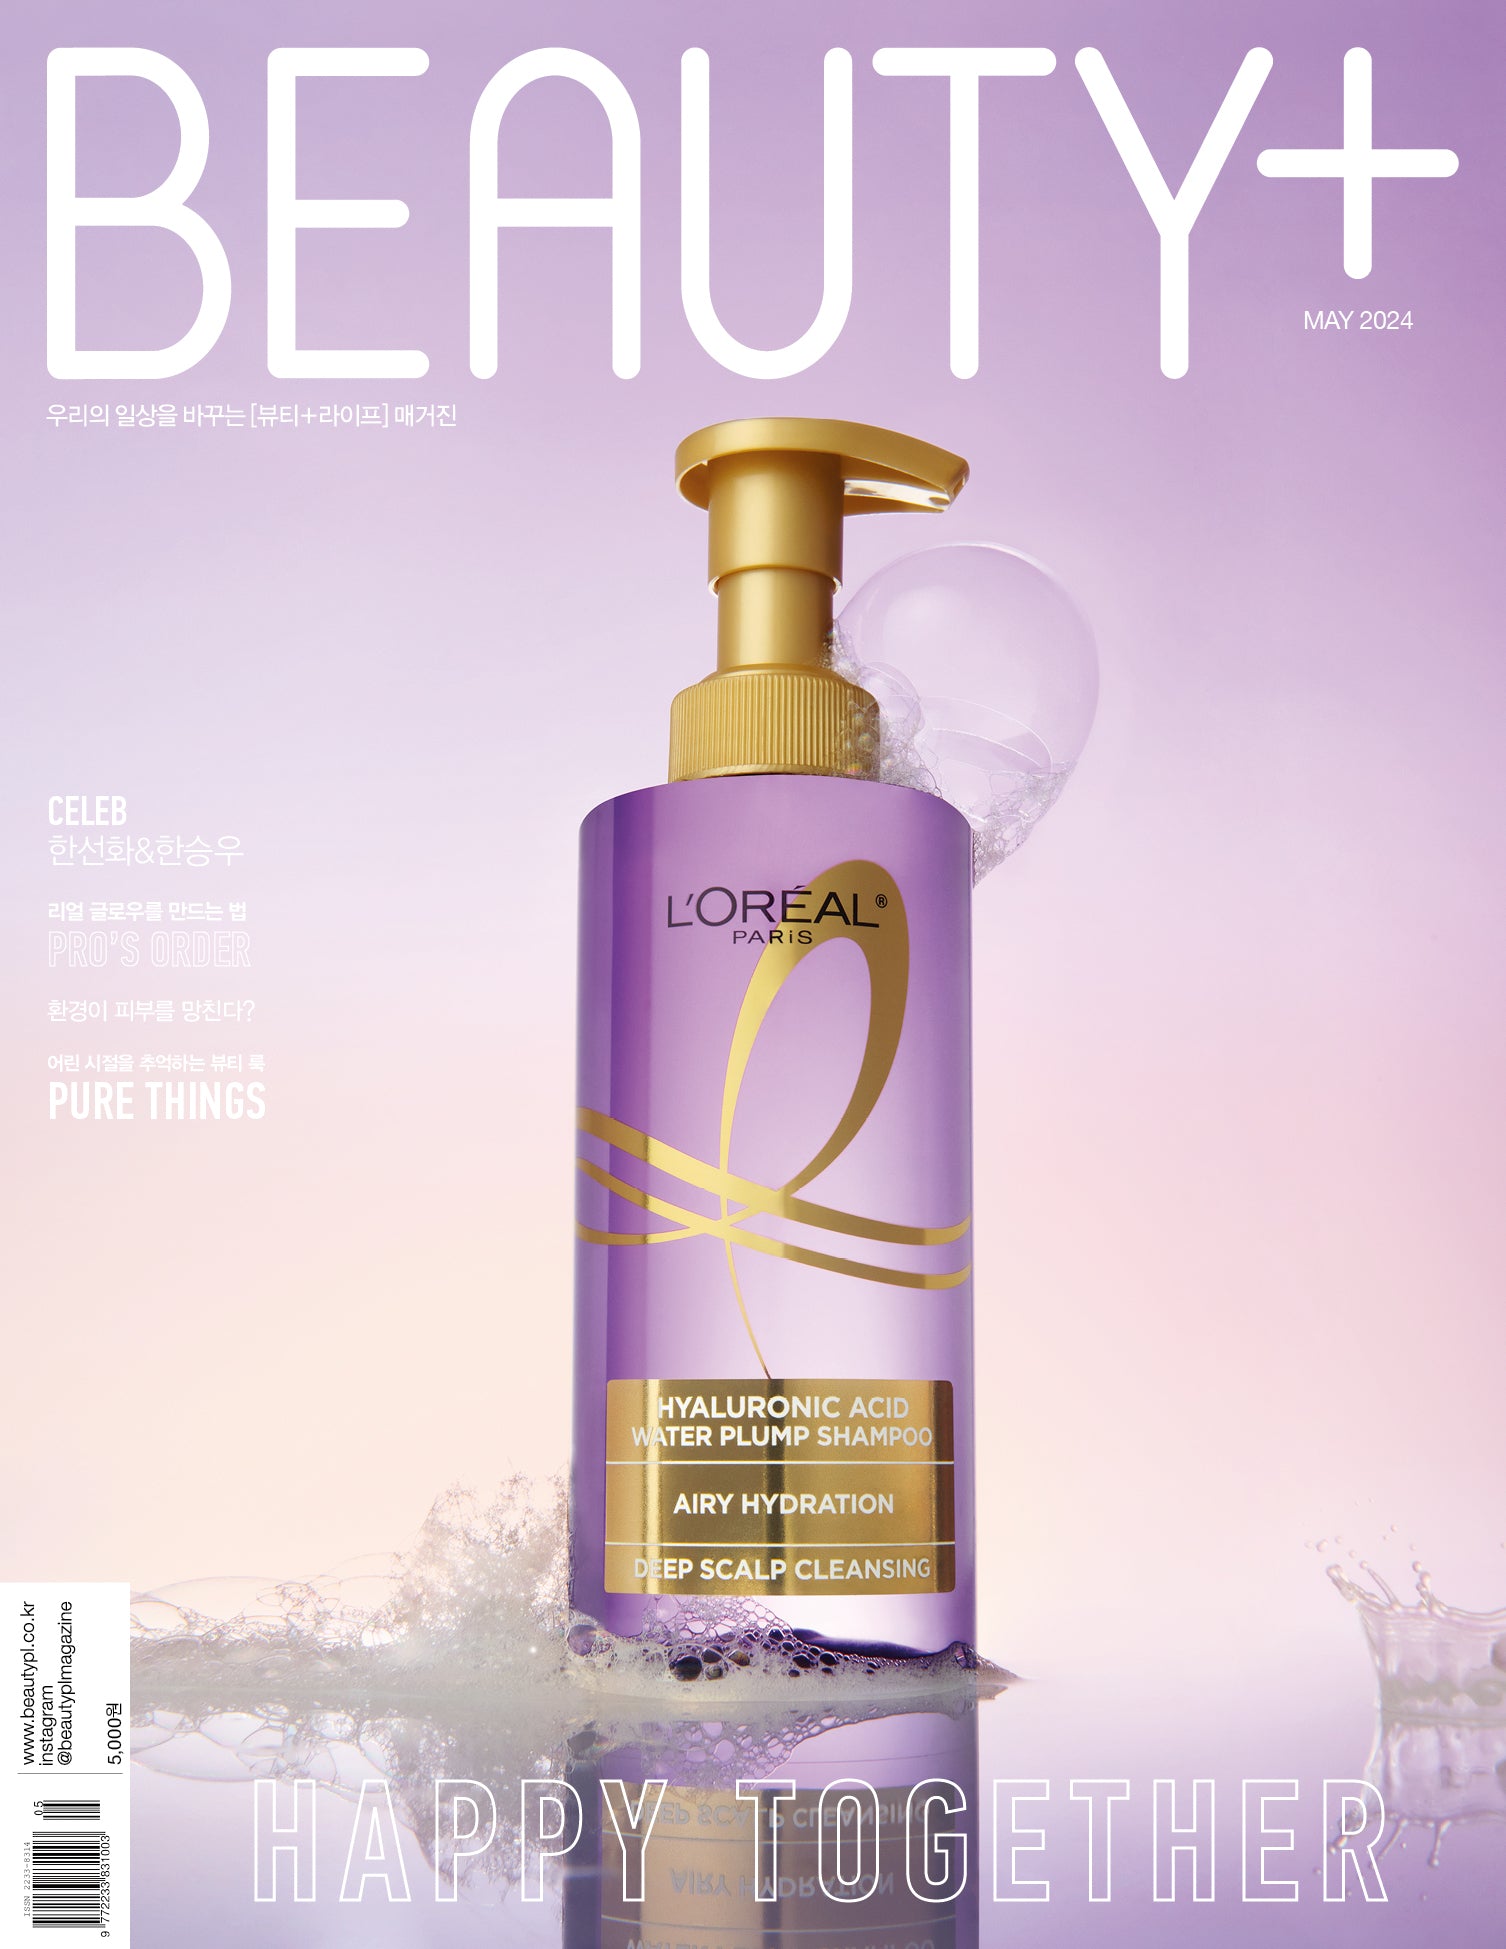 L'Oréal Paris COVER BEAUTY+ MAGAZINE 2024 MAY ISSUE A VER.